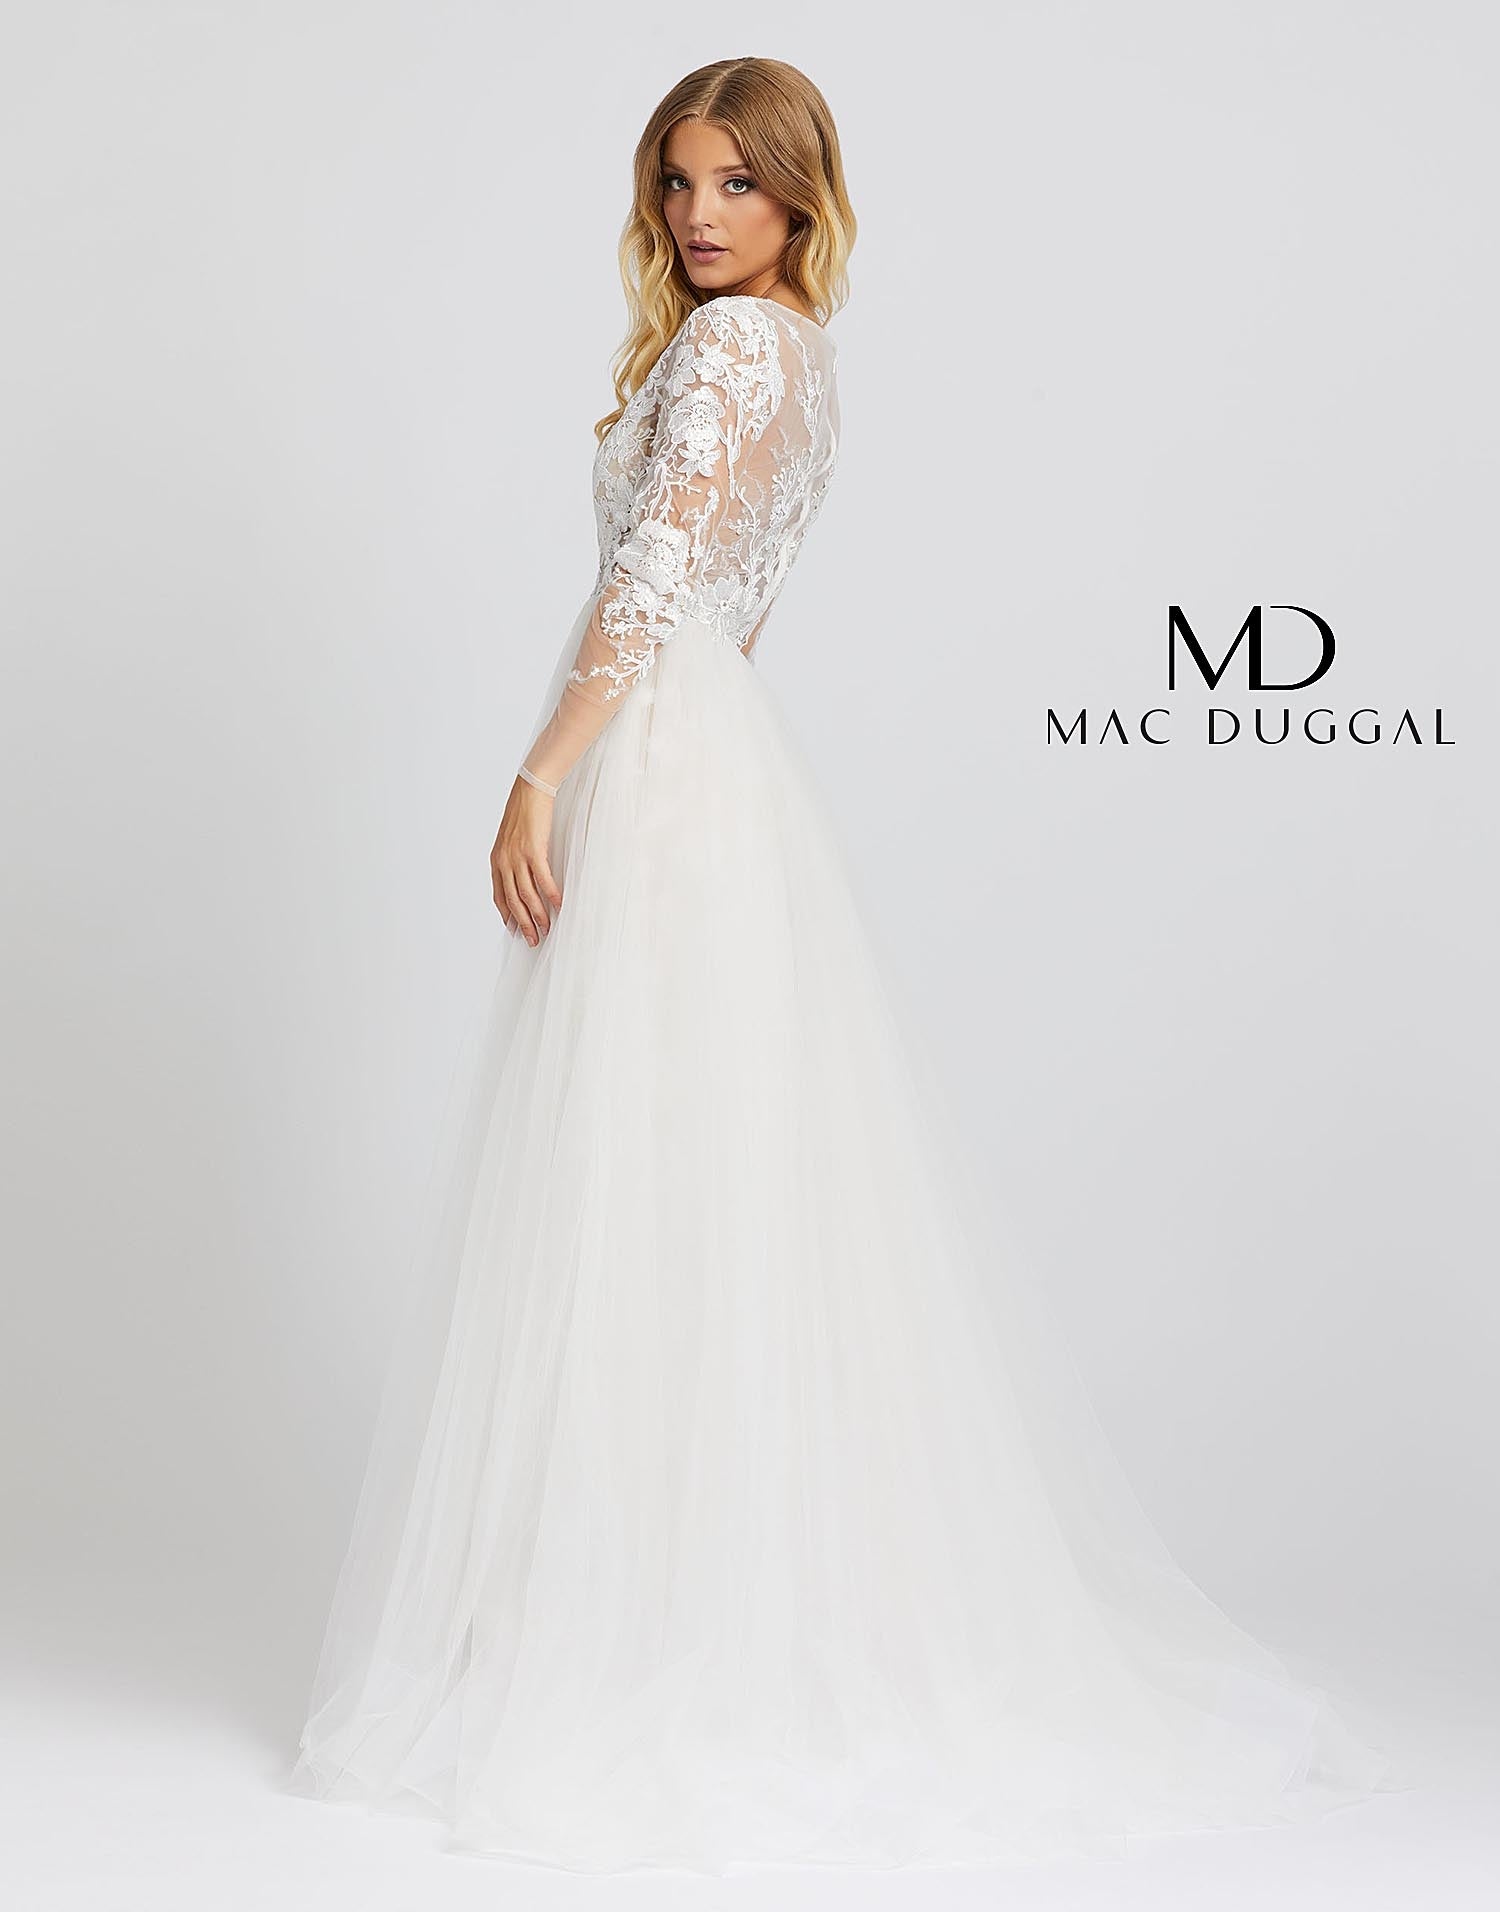 Mac Duggal 26322M - 26322 Love this dress so much you’ll want to re-wear it for your wedding! Style 26322M is an ivory nude ball gown with sheer long sleeves, a v-neckline, and overskirt. This incredible gown has embroidery detailing from head to toe. This Mac Duggal Prom Collection 26322M ivory nude formal gown has a fitted silhouette in embroidered tulle, with a deep V-neckline and illusion long sleeves. The illusion bodice is offset with a fully lined skirt, finished with a gathered overskirt that cascad